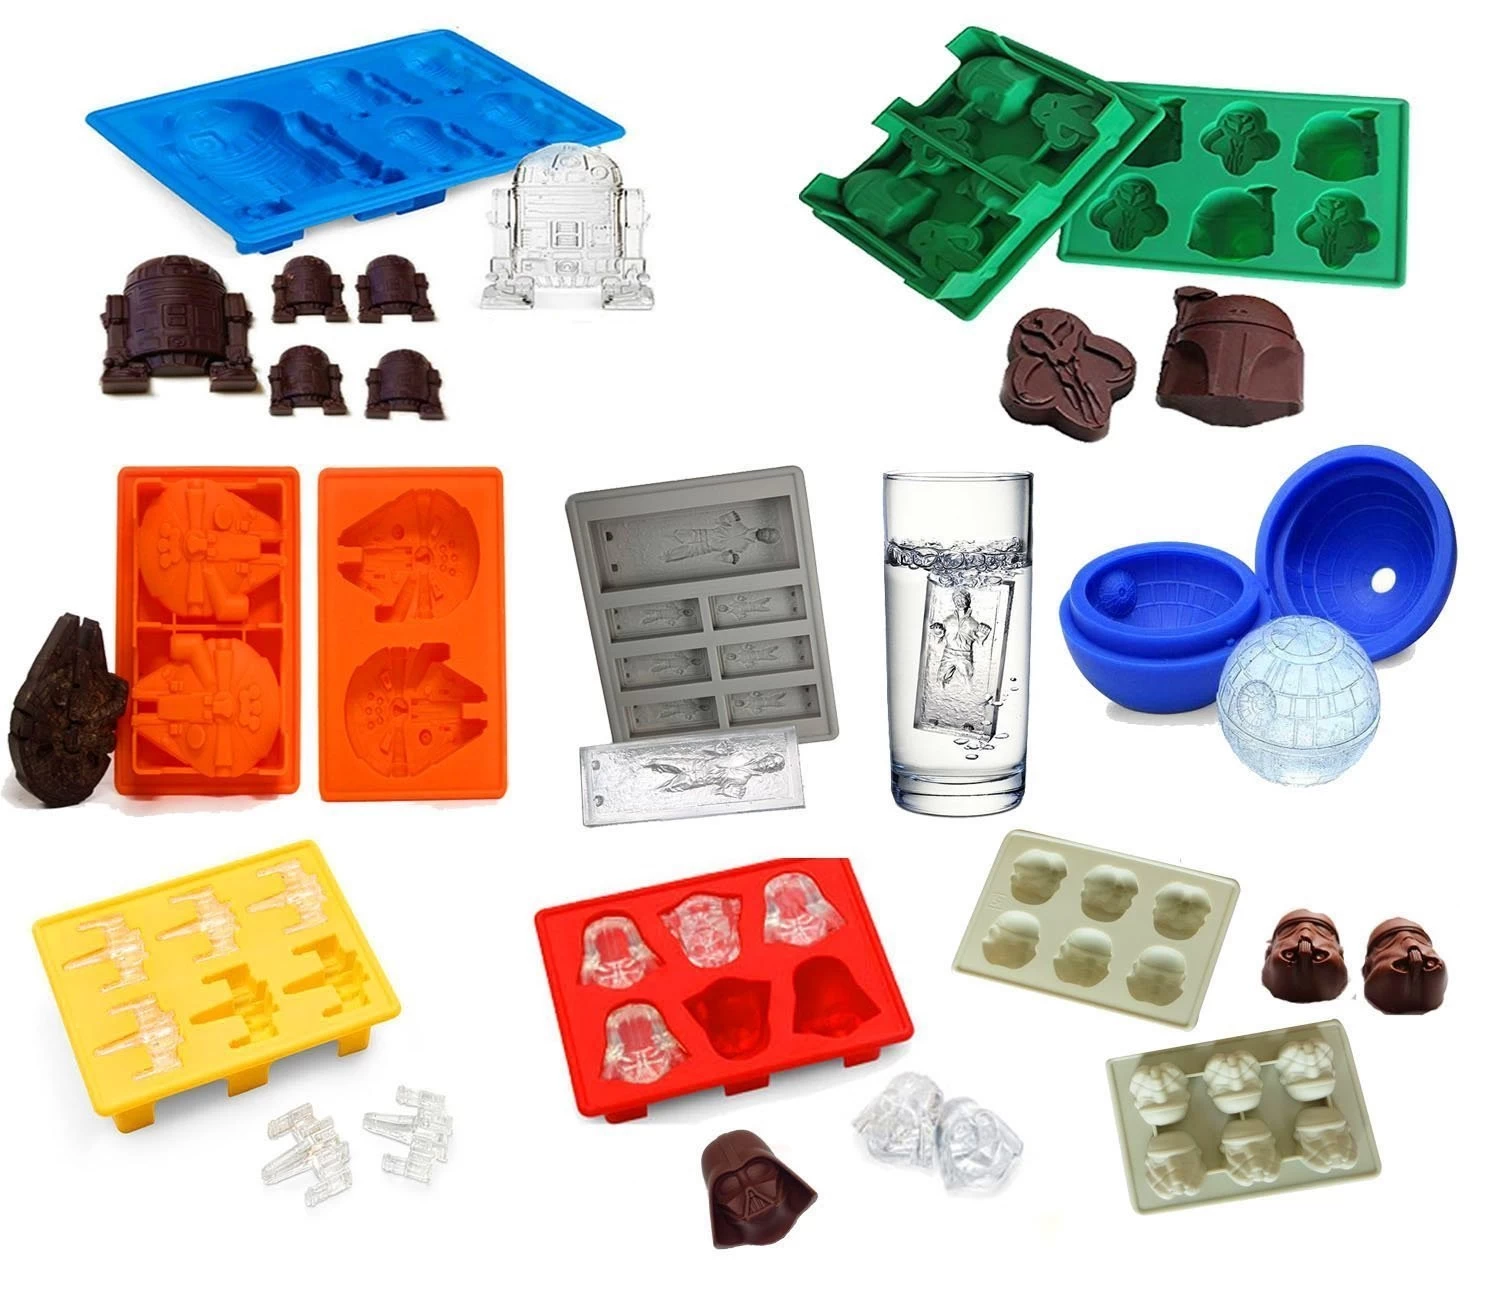 Complete Set of 9 Star Wars Silicone Chocolate Candy Mold Ice Cube Tray